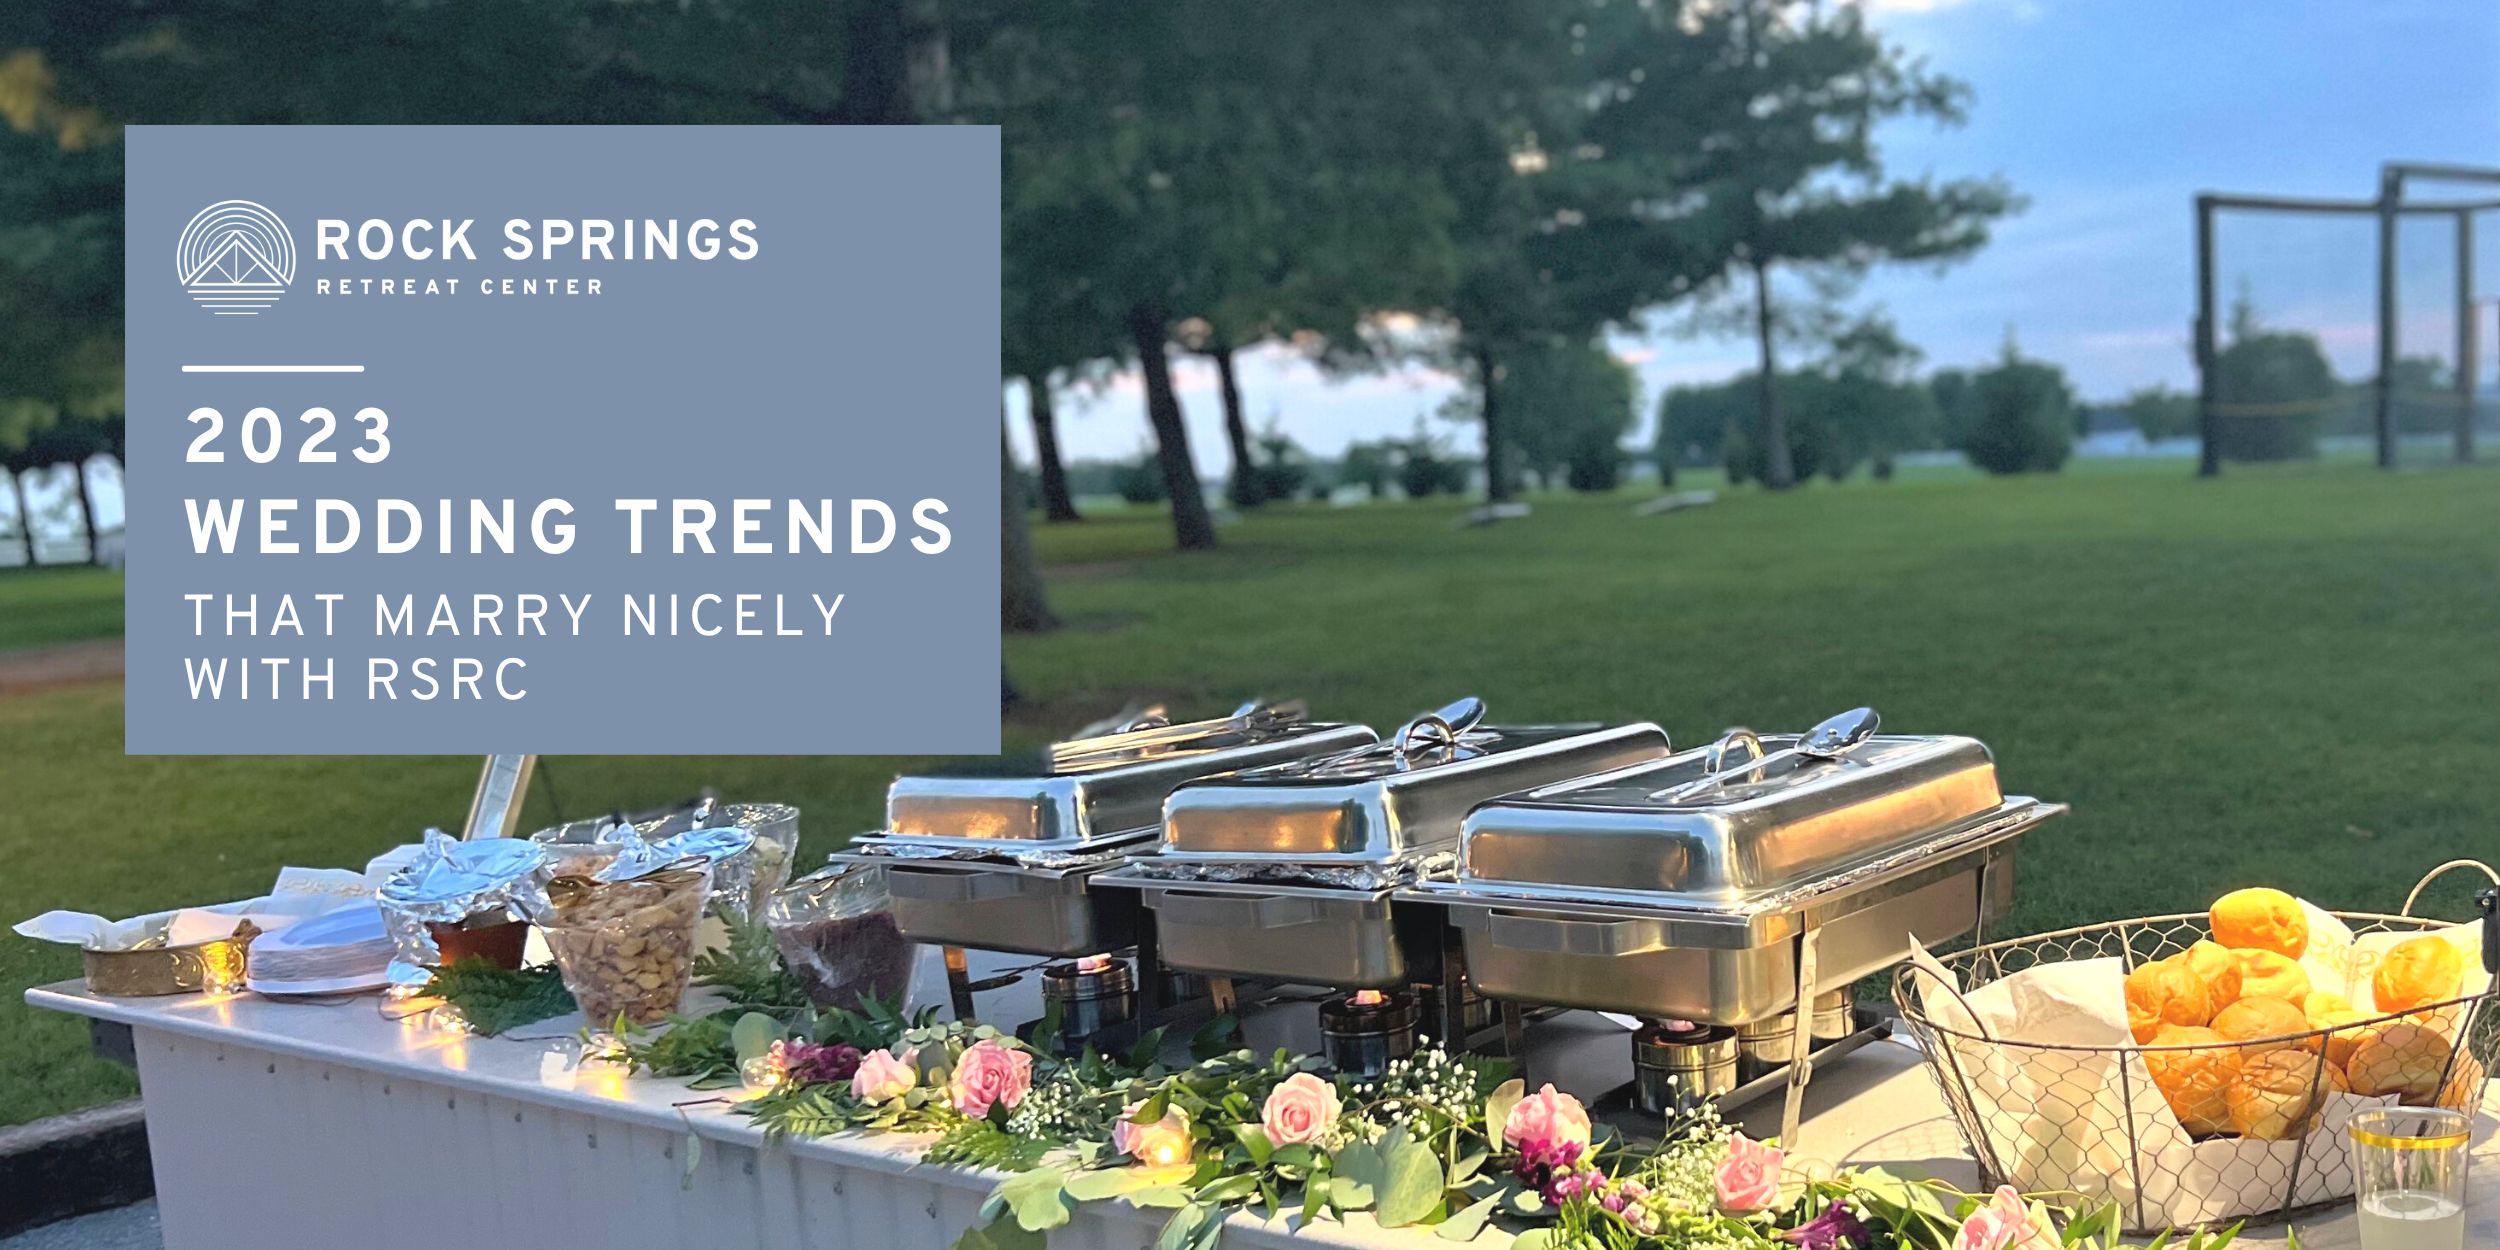 2023 Wedding Trends That Marry Nicely with RSRC